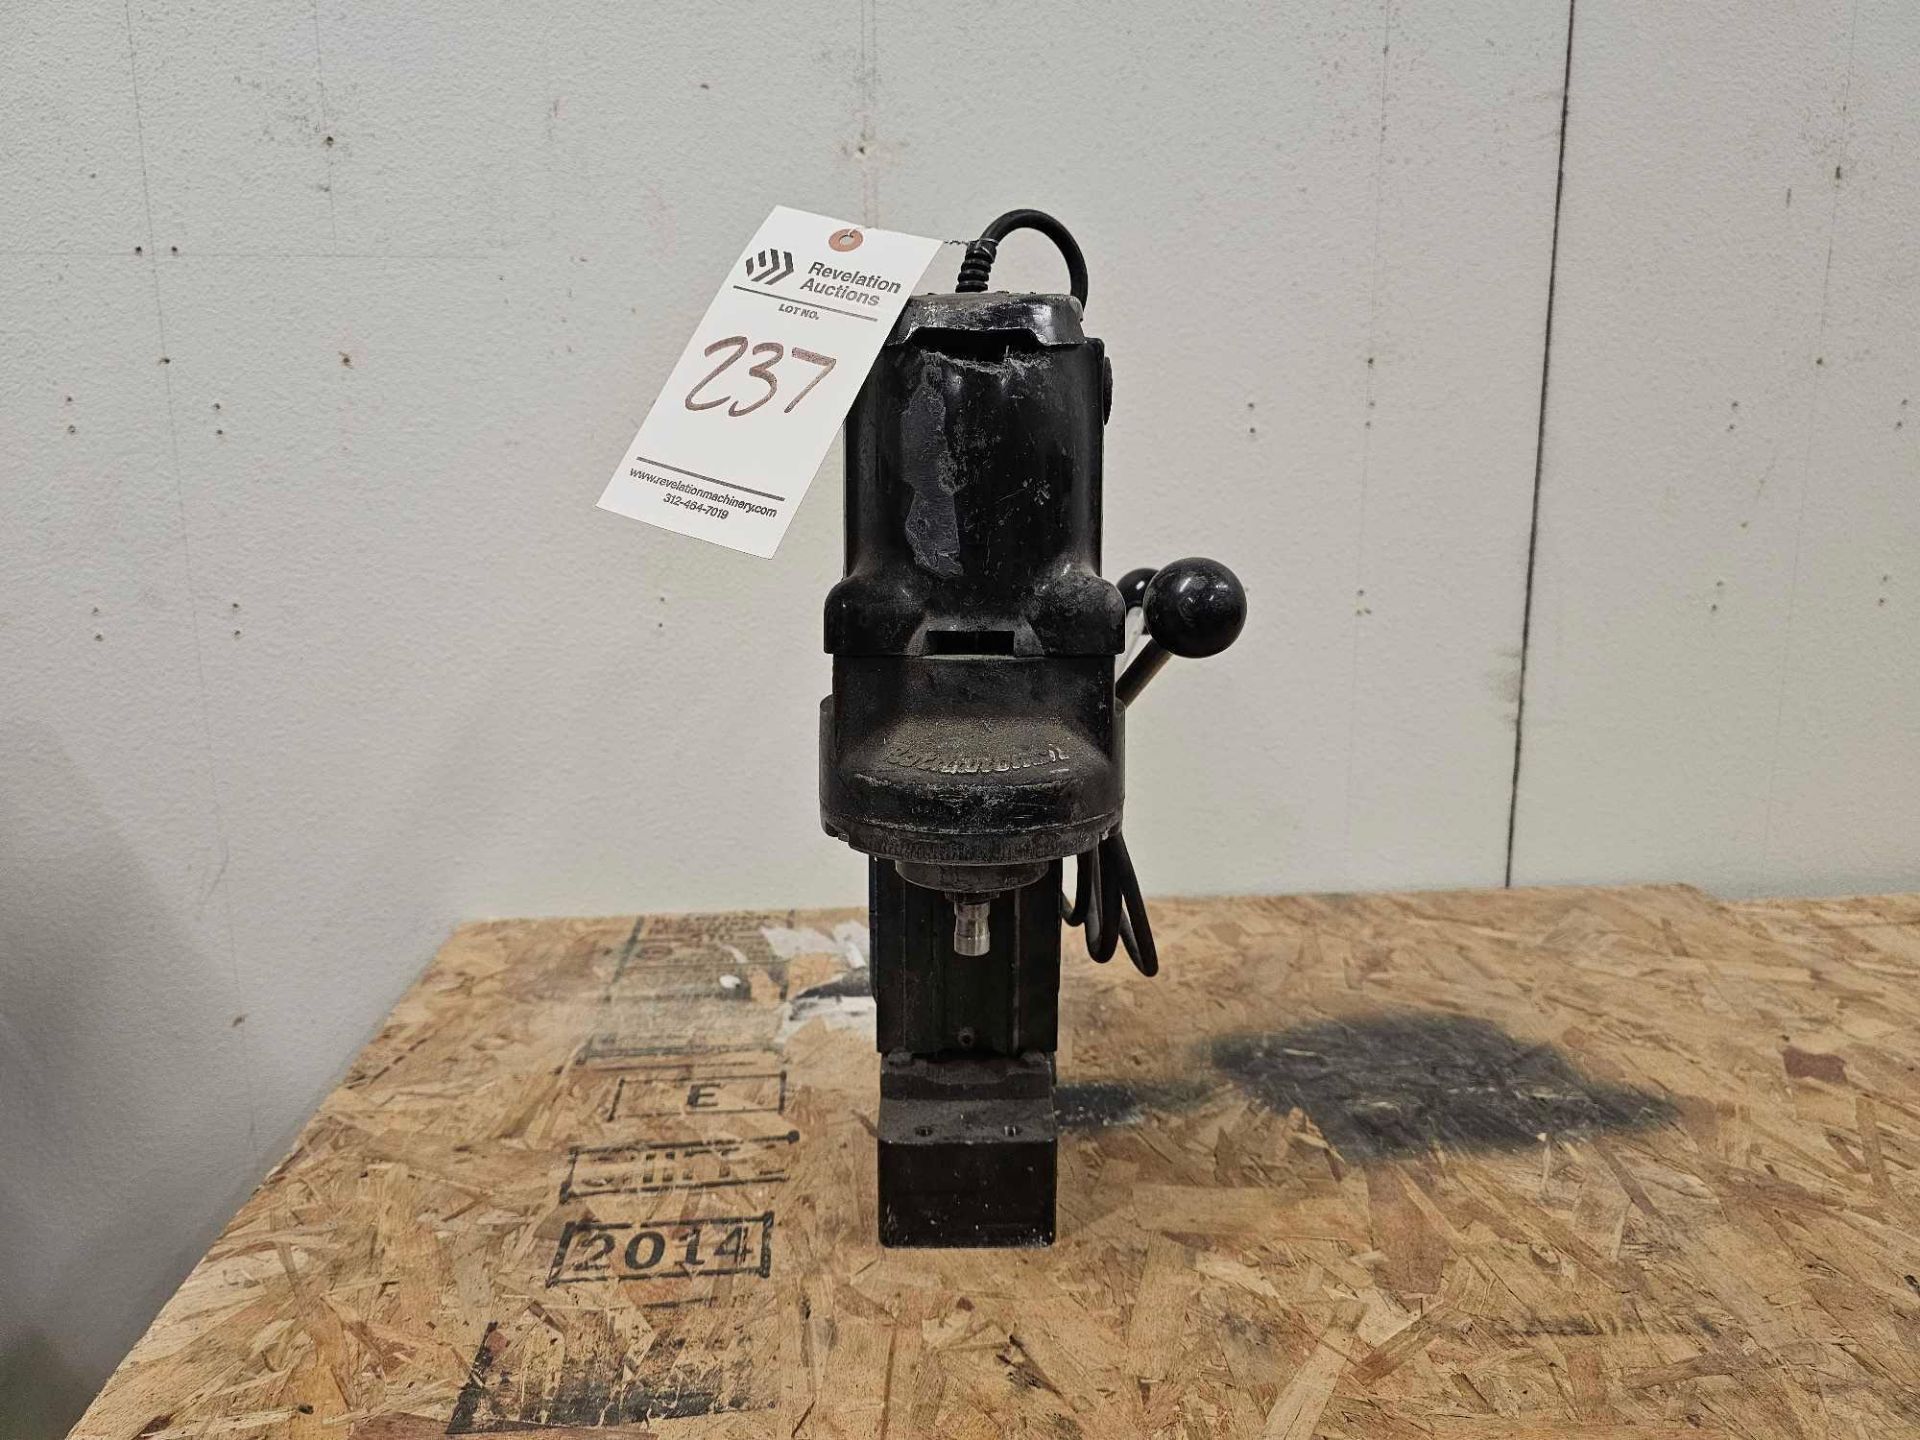 HOUGEN MAG DRILL, MAGNETIC DRILL PRESS